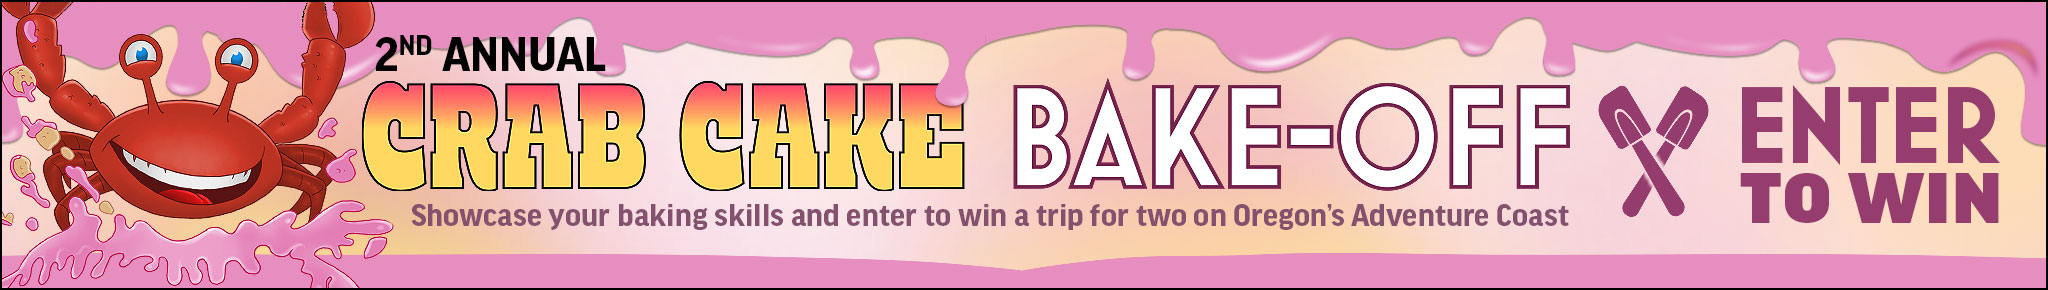 Enter to win our claw-some crab cake bake-off and win a vacation to Oregon's Adventure Coast